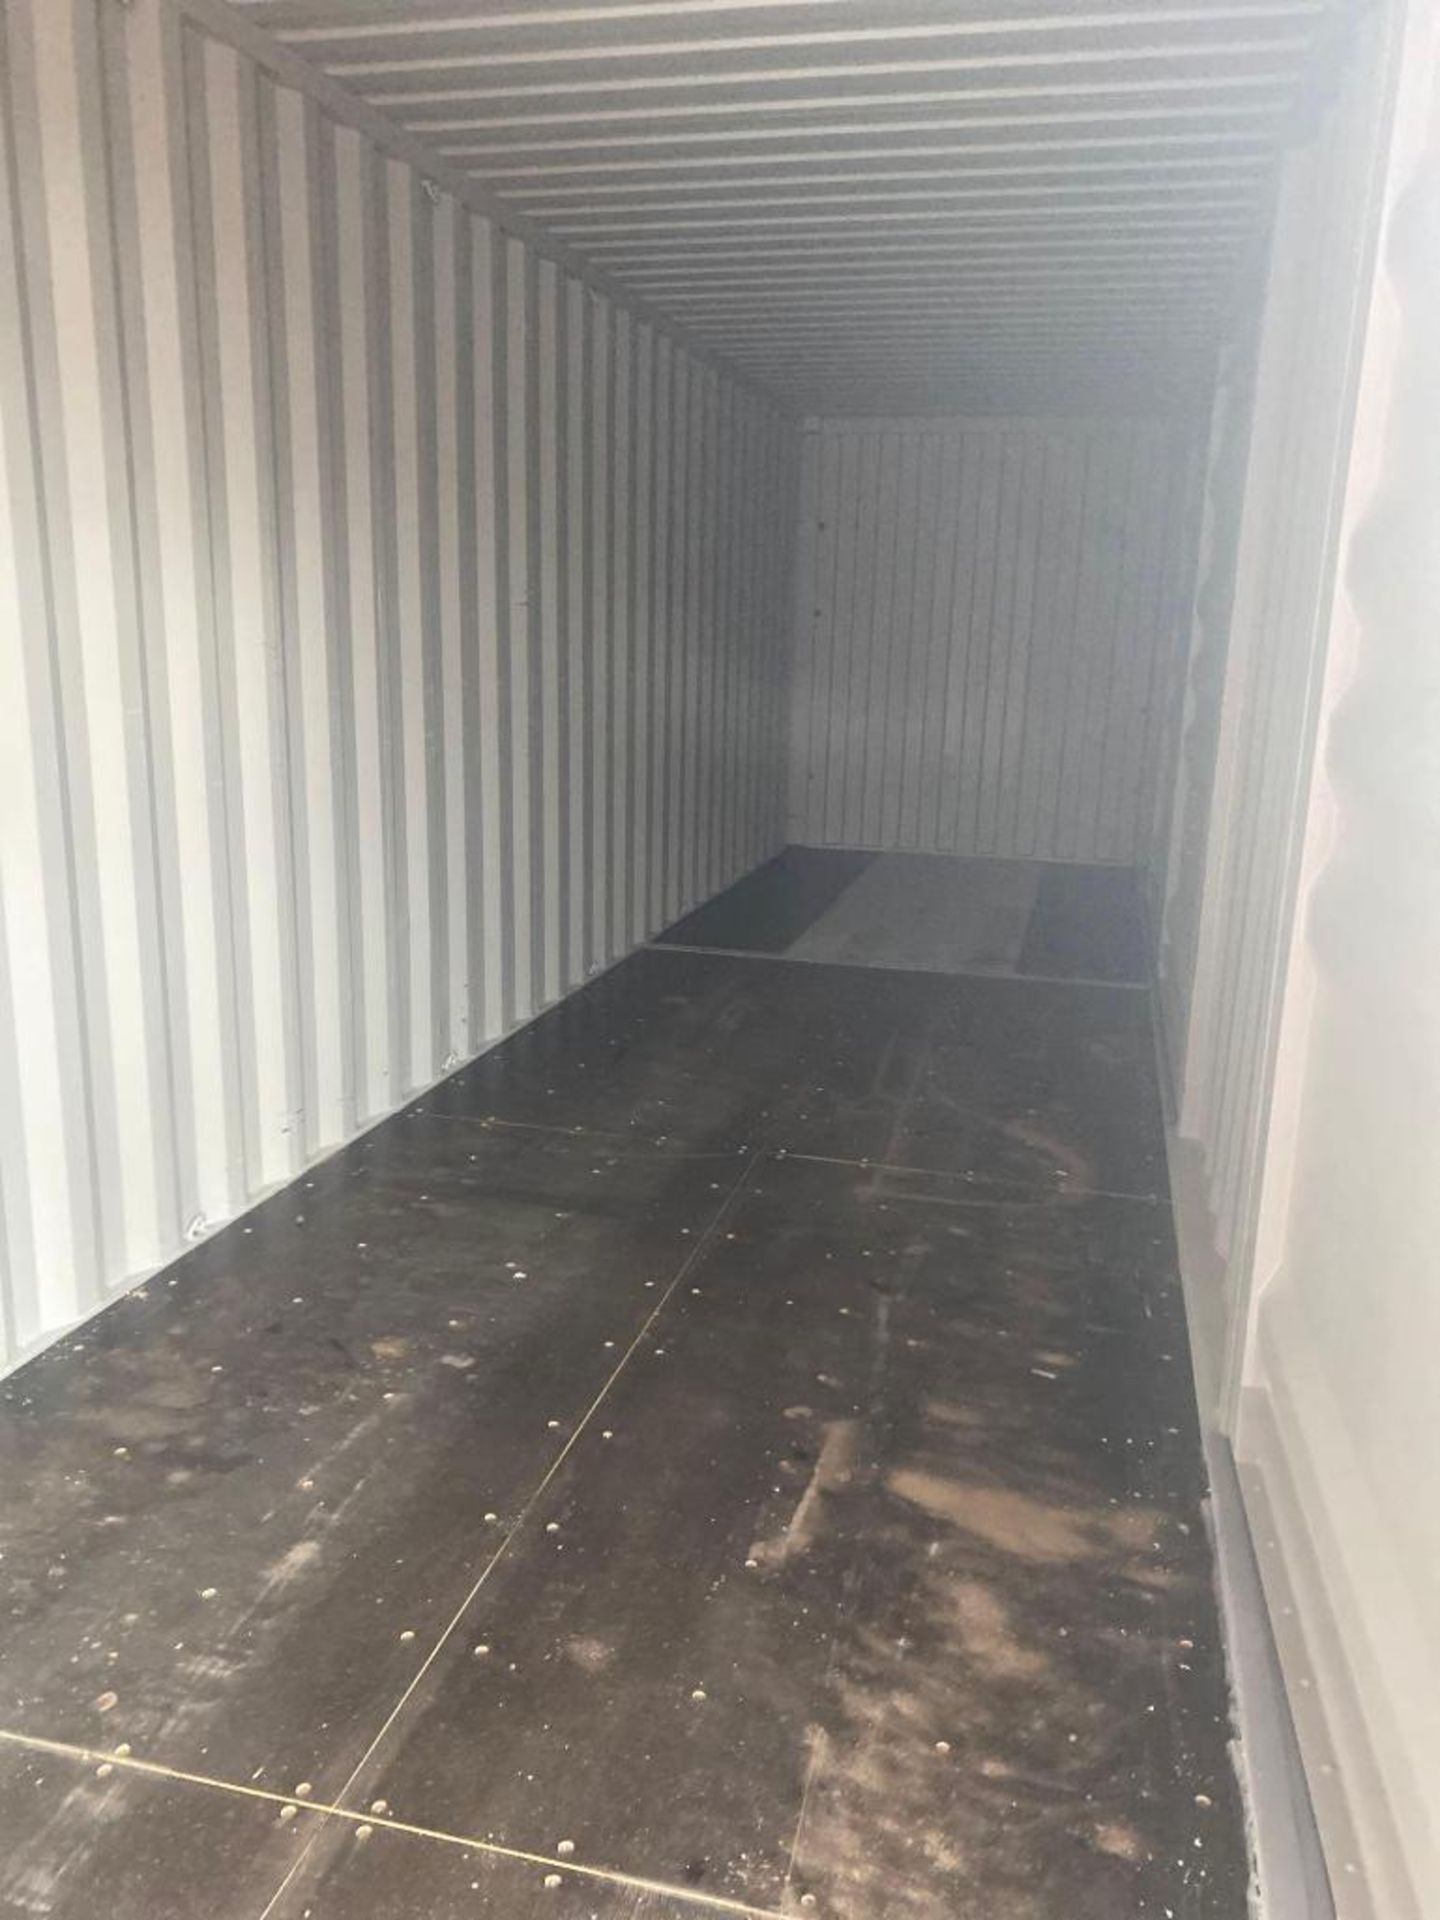 New NYIU 40ft (2 Side Door) Steel Shipping/Storage Container - Image 2 of 5